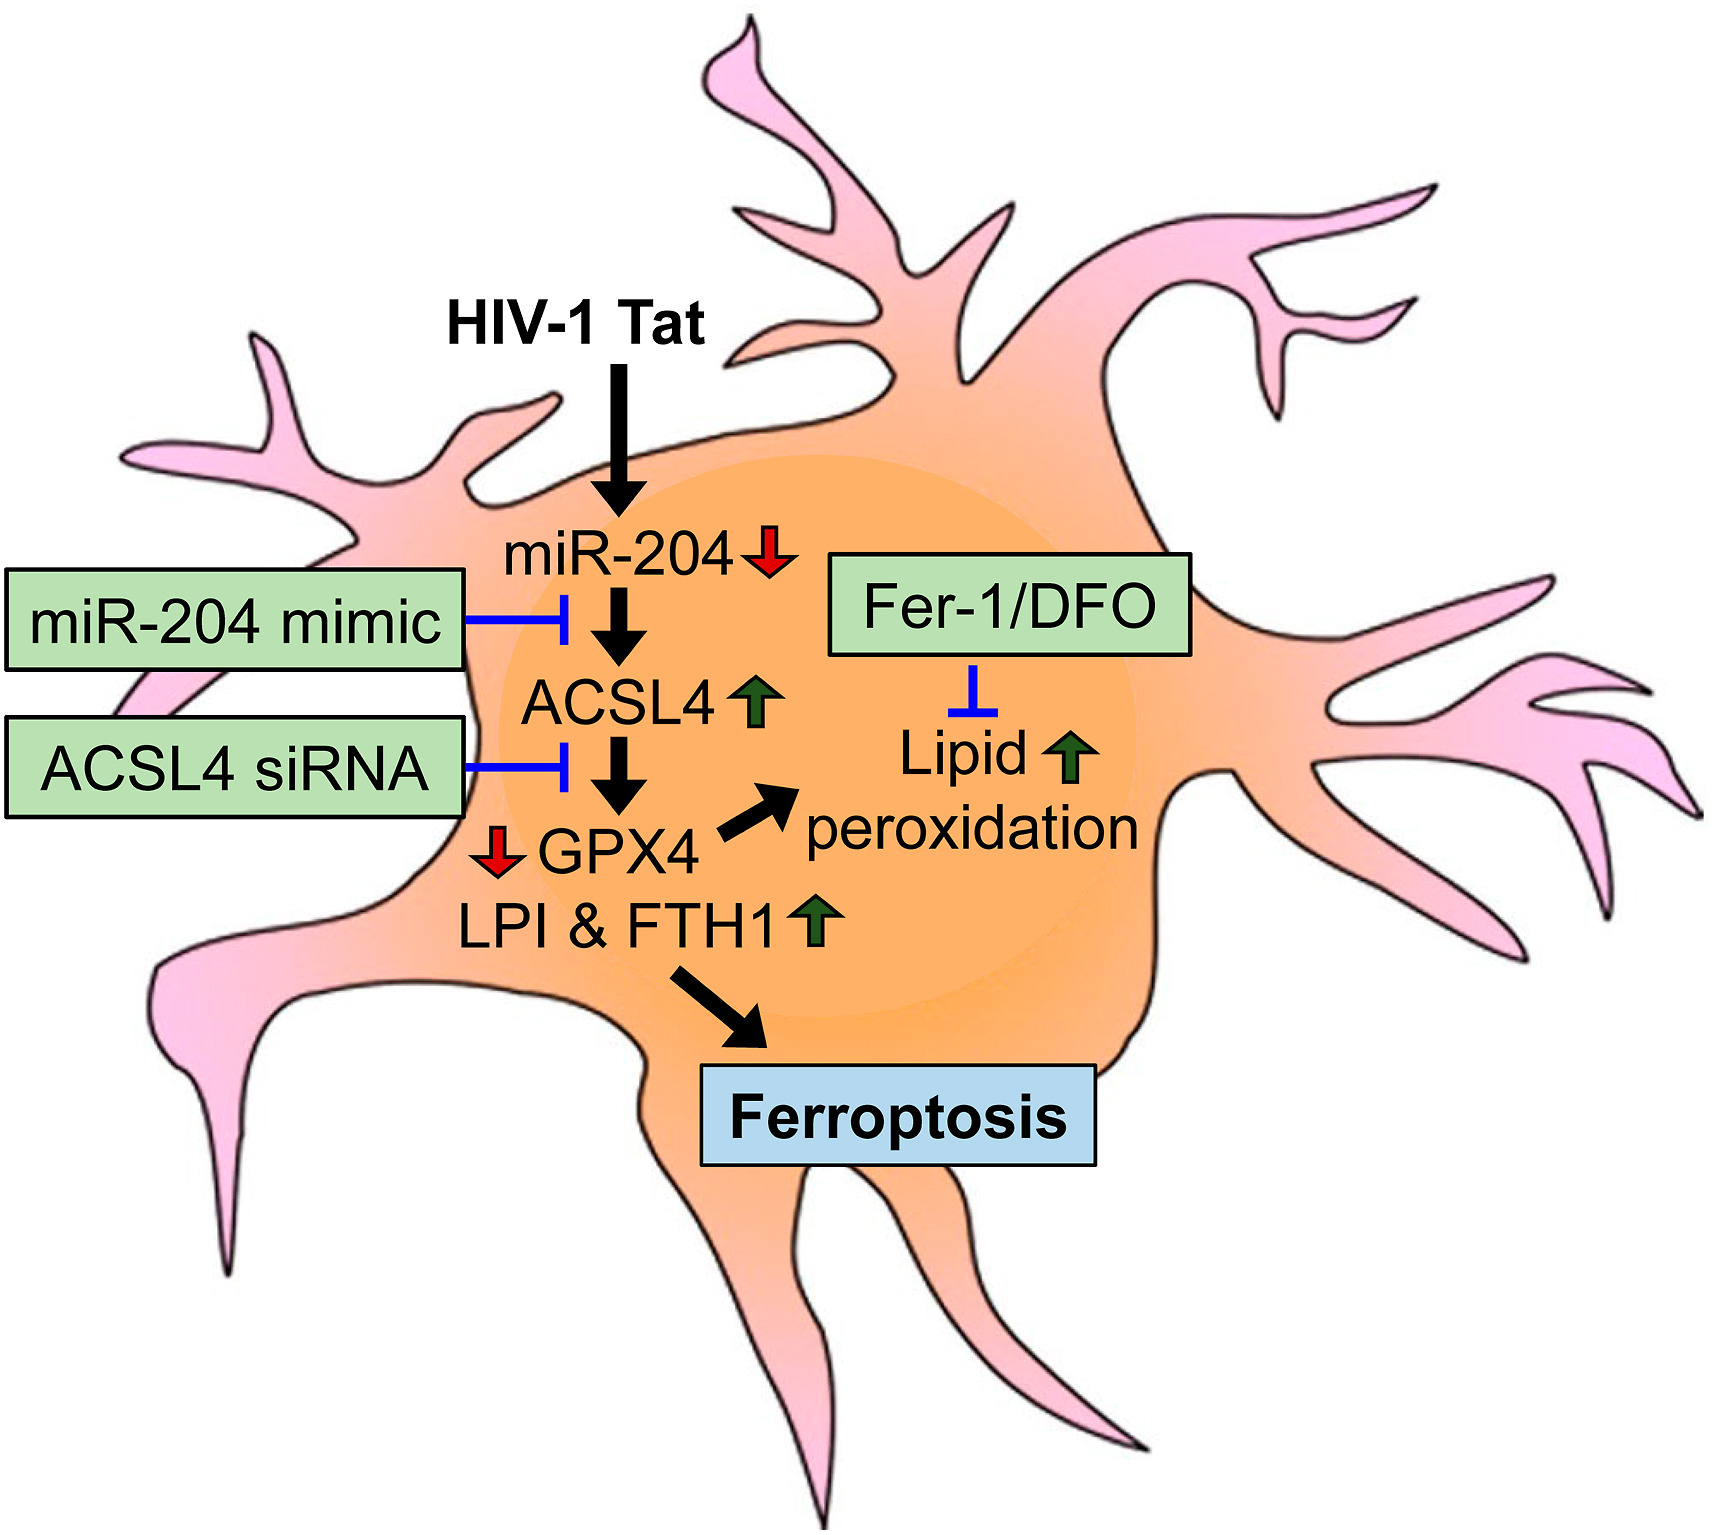 Schematic showing the proposed mechanism involved in HIV-1 Tat-mediated microglial ferroptosis.